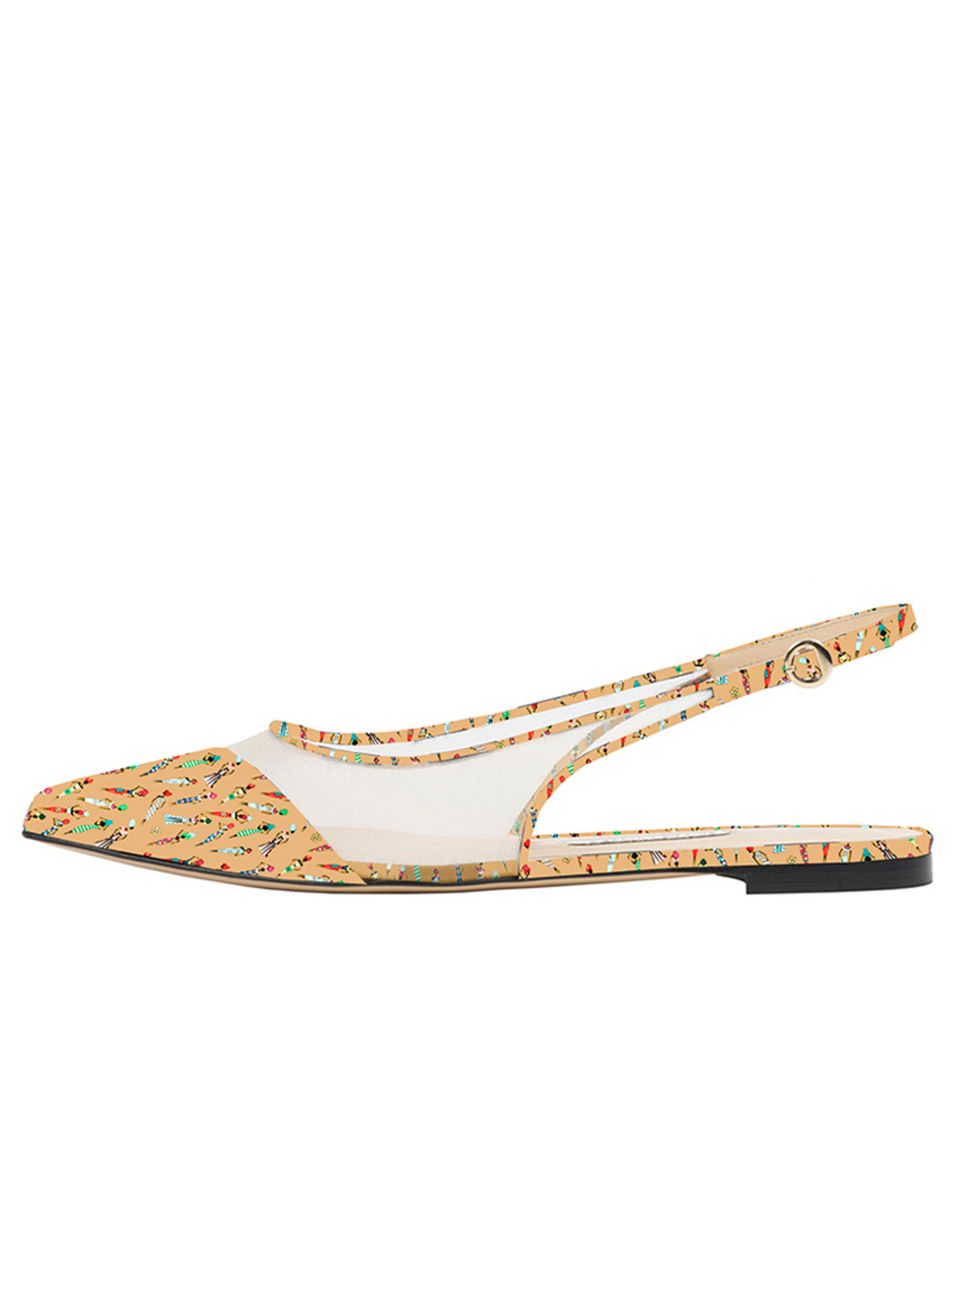 <p>Bionda Castana for M2M <a href="http://biondacastana.com/collections/shoes/products/violet-mothers2mothers-africa-design-flat-pointed-slingback" target="_blank">'Violet shoes'</a>, £375</p>